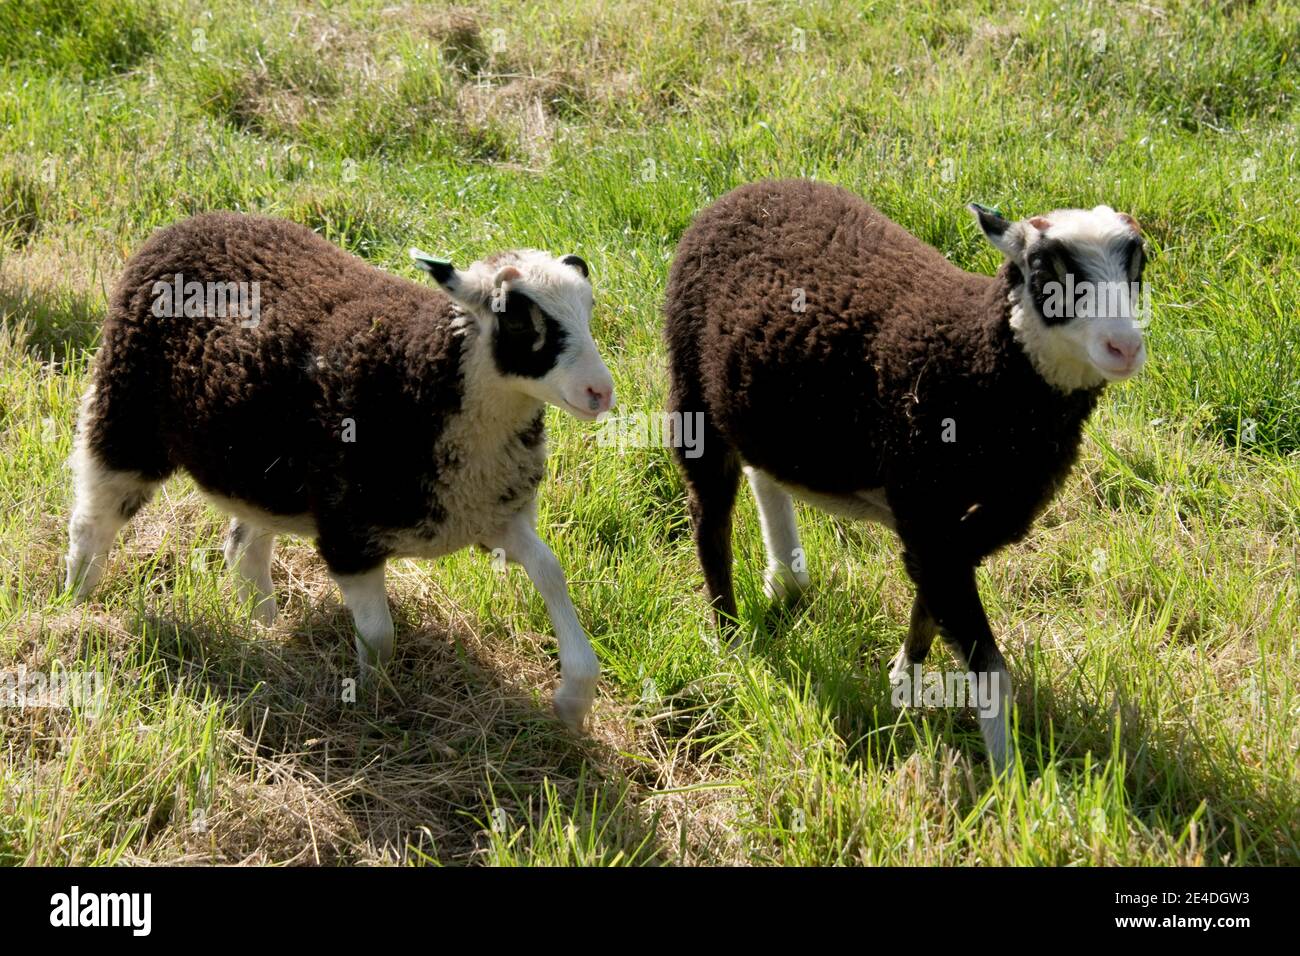 Two pet Shetland wether 3 month old lambs, black with with black eye 'patches' on white heads, Berkshire, July Stock Photo